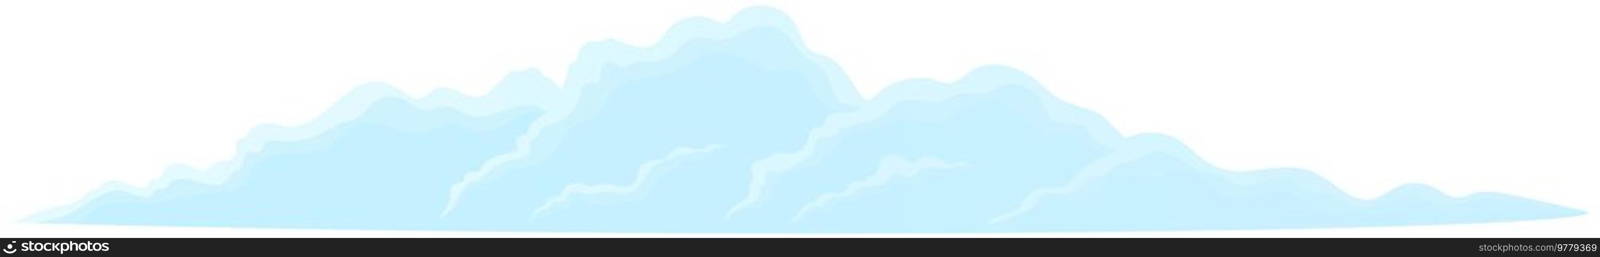 Cartoon blue clouds set on white sky background. Collection of smoke patterns and fog icons. Clouds with different sizes and forms. Cloudscape in air. Natural weather atmosphere elements in flat style. Cartoon blue clouds set on white sky background. Collection of smoke patterns and fog icons